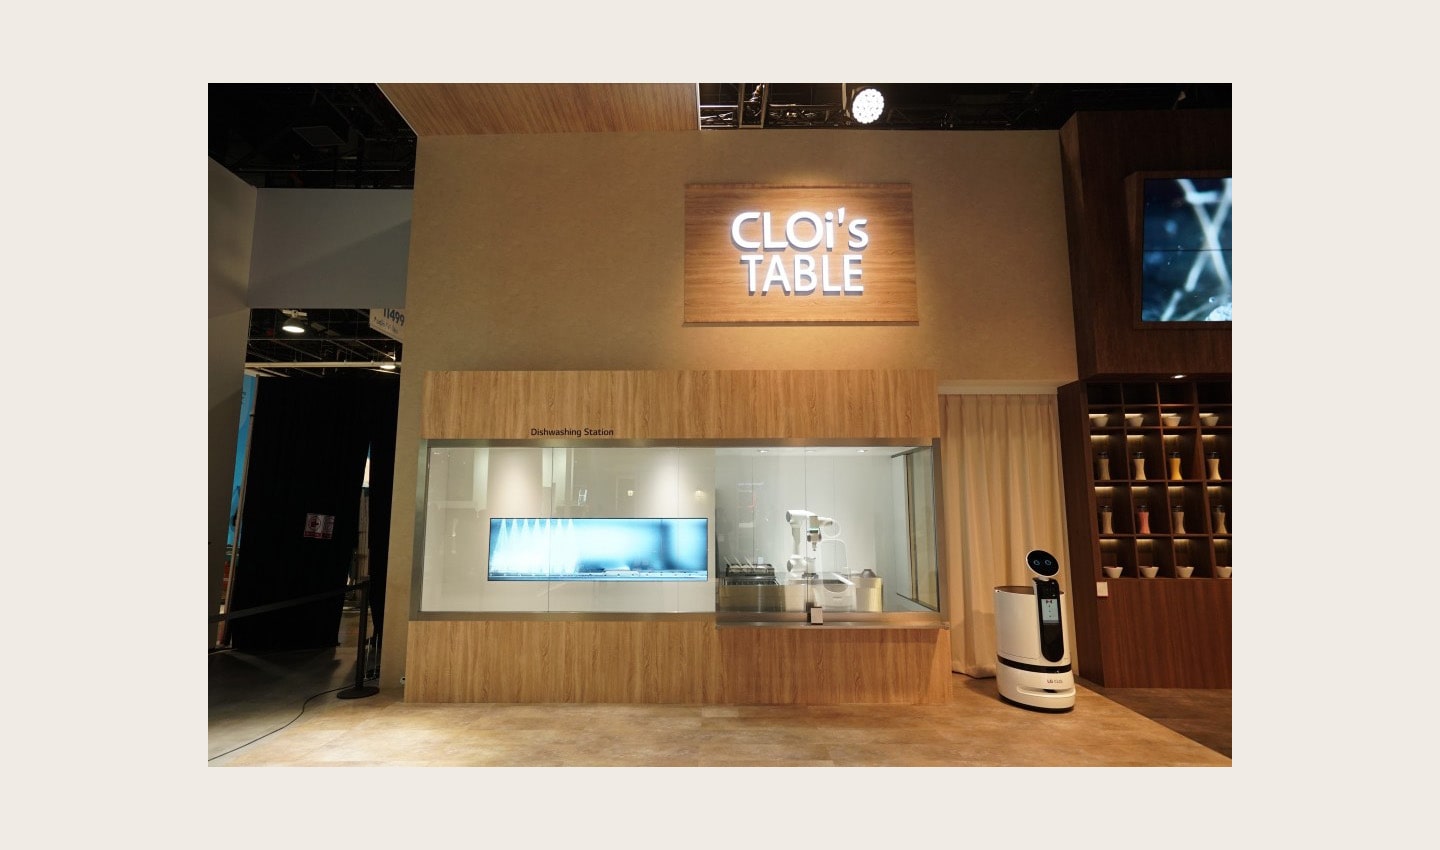 A front view of the ‘CLOi’s Table’ restaurant set up for CES 2020, with LG’s advanced robots from its CLOi lineup on display to visitors